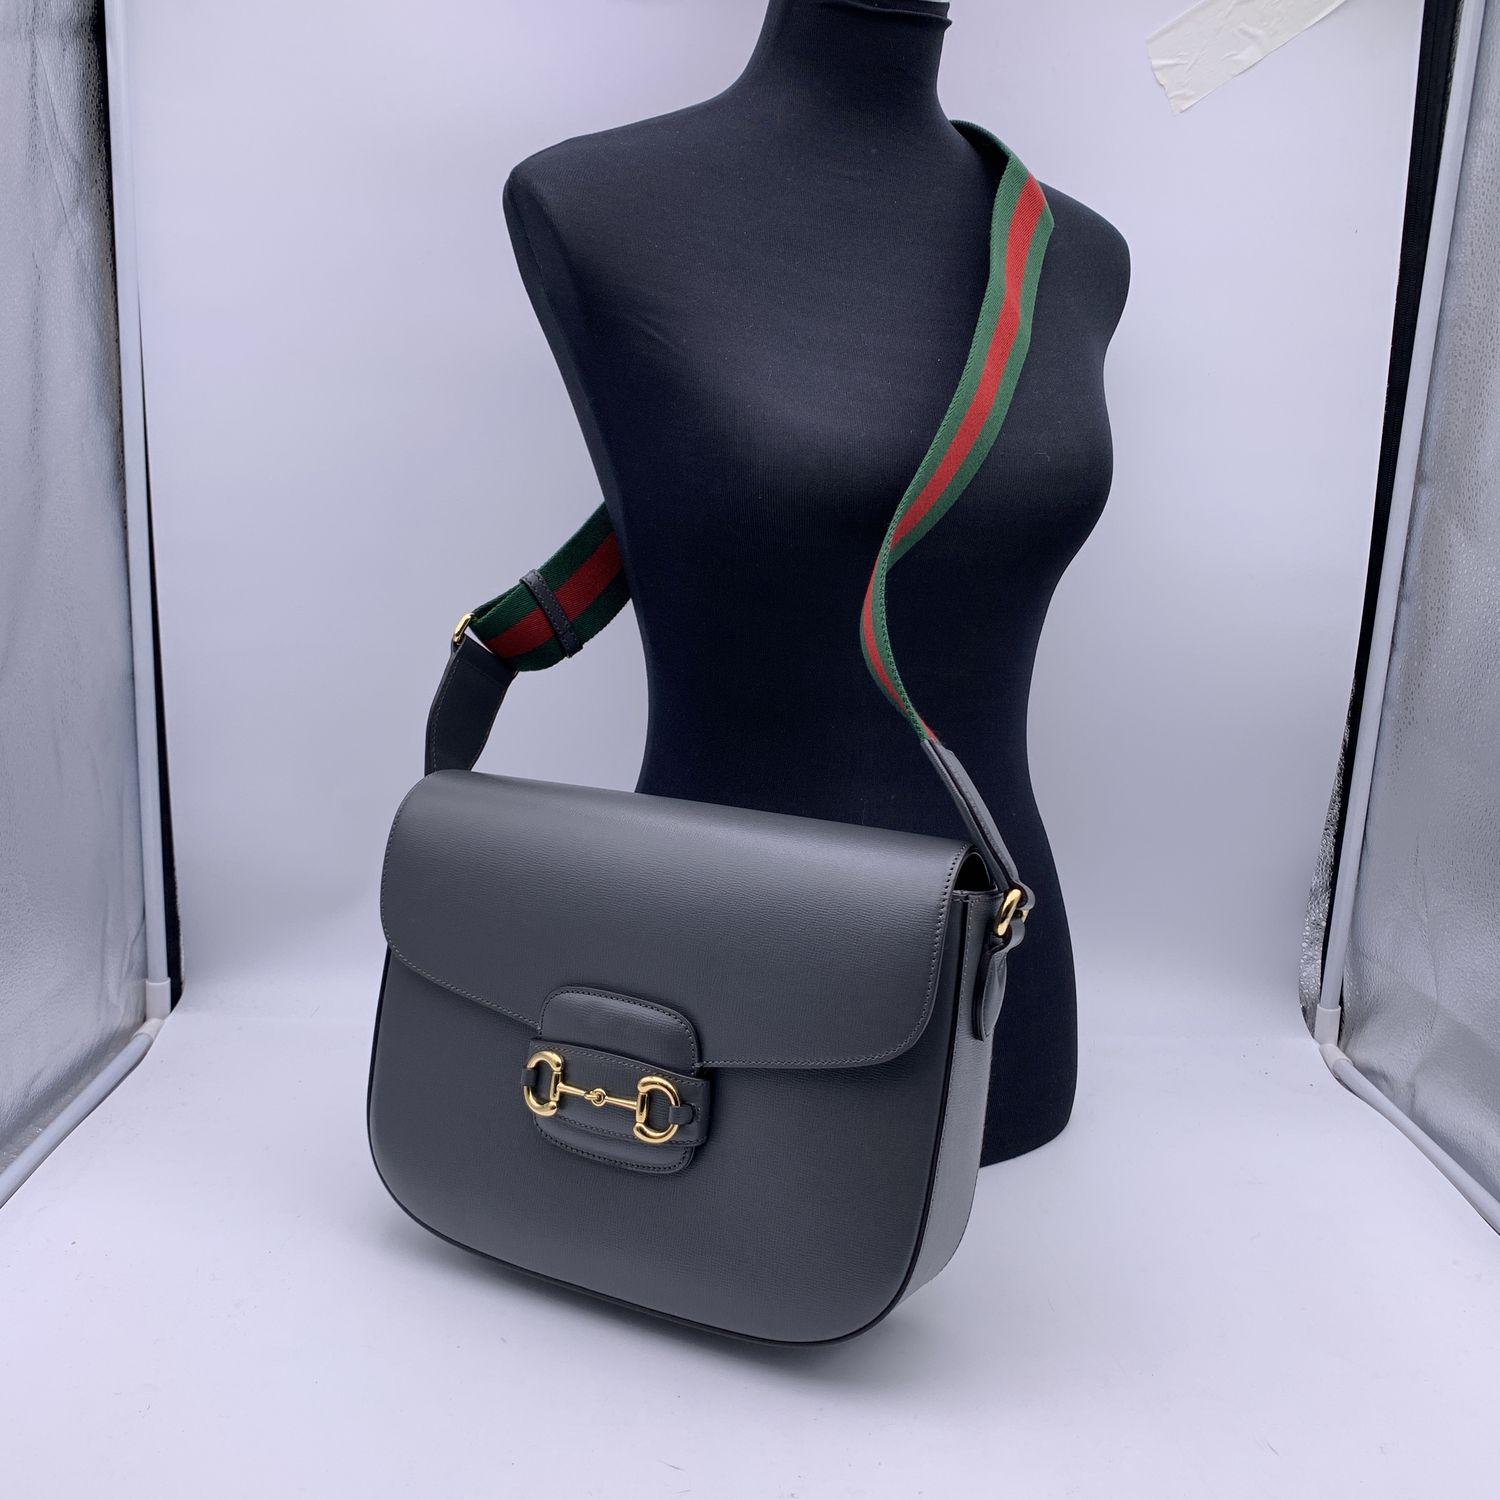 This beautiful Bag will come with a Certificate of Authenticity provided by Entrupy. The certificate will be provided at no further cost.

Beautiful Gucci '1955 Horsebit' shoulder bag, crafted in grey leather. Structured shape. This model is a